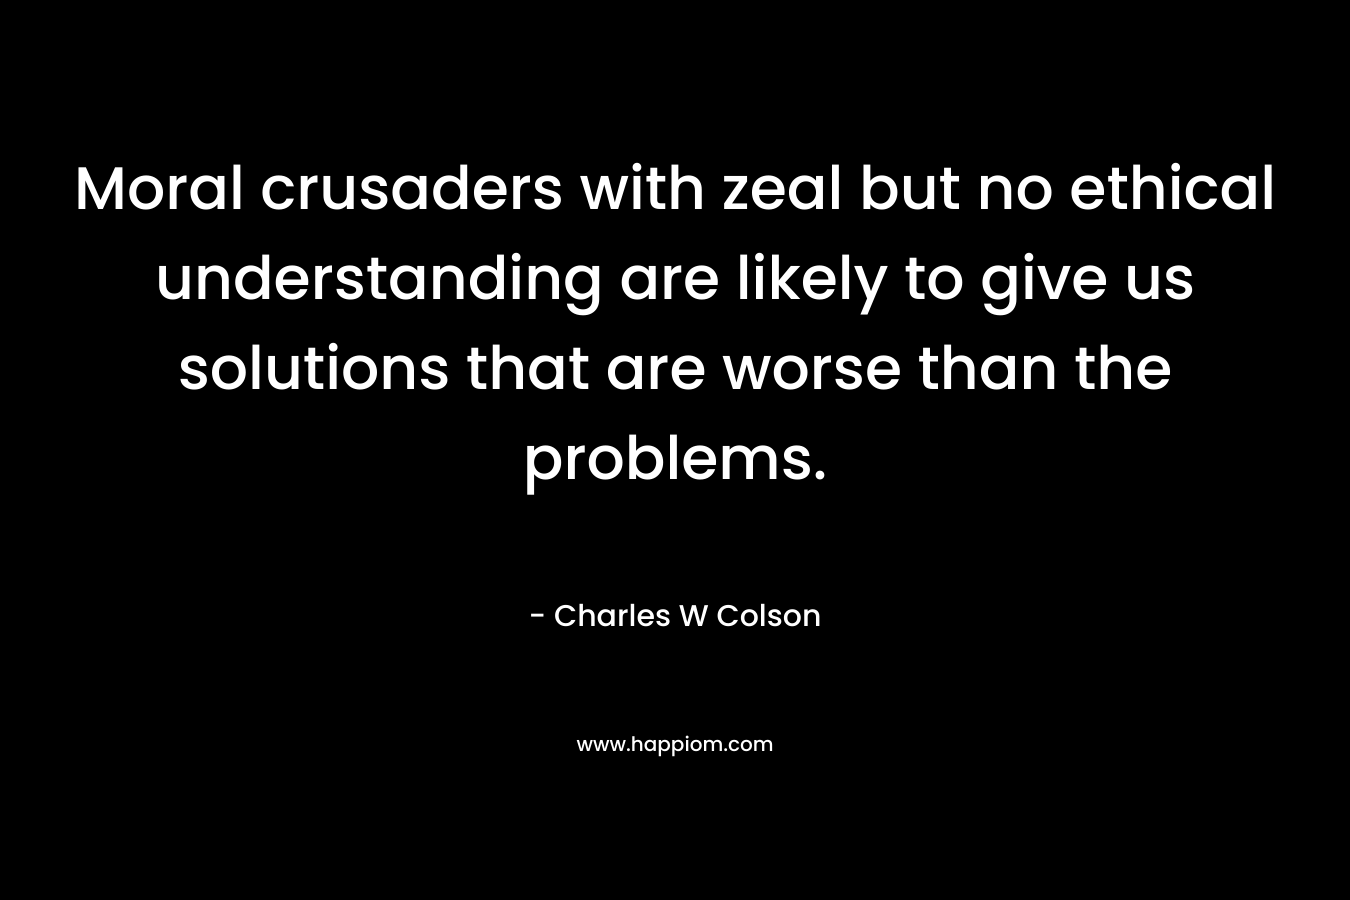 Moral crusaders with zeal but no ethical understanding are likely to give us solutions that are worse than the problems. – Charles W Colson